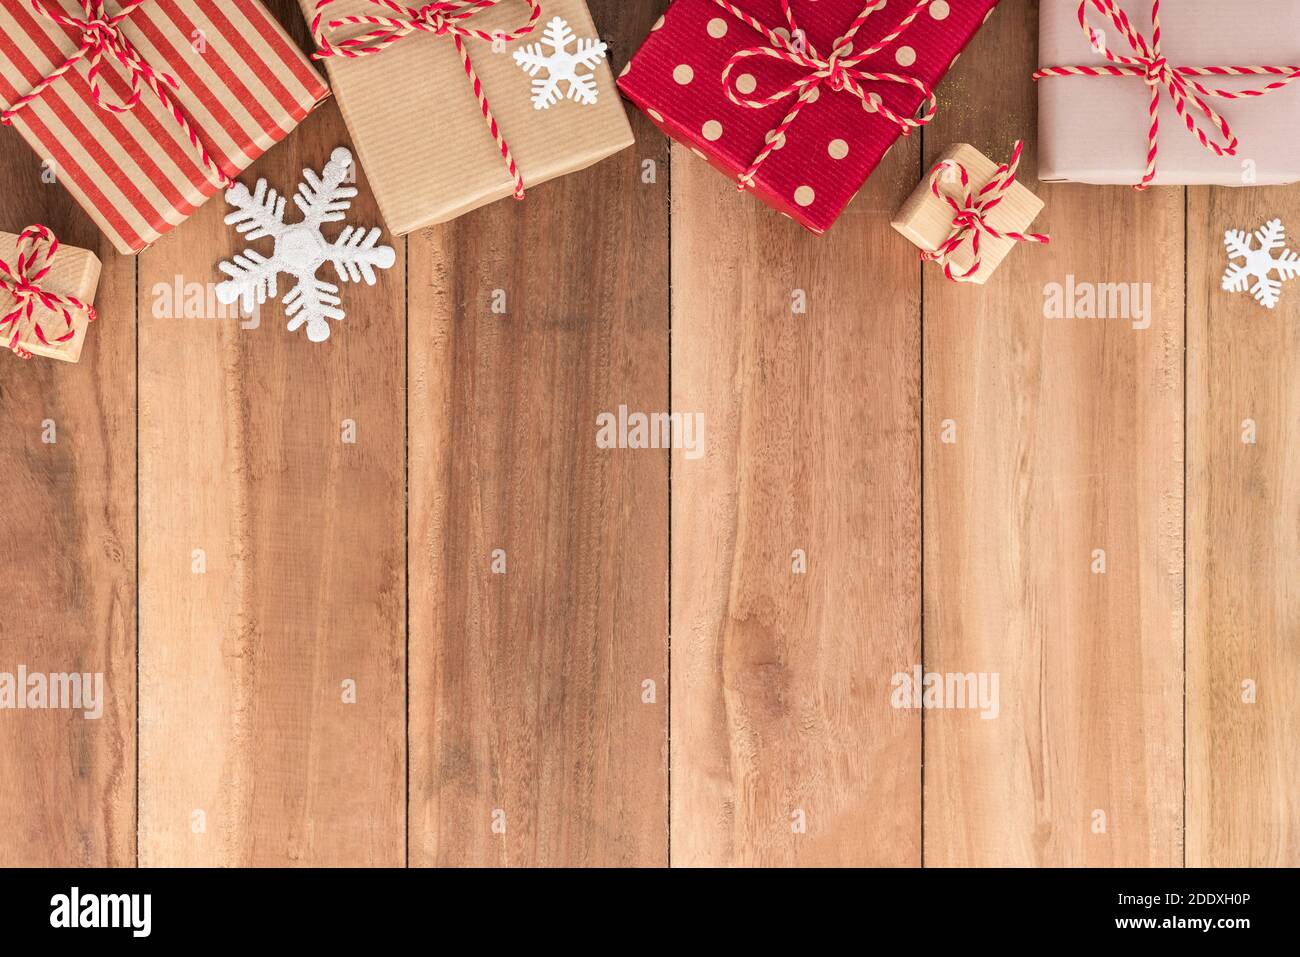 Gift boxes and Christmas ornaments on wood background, border design, top view Stock Photo